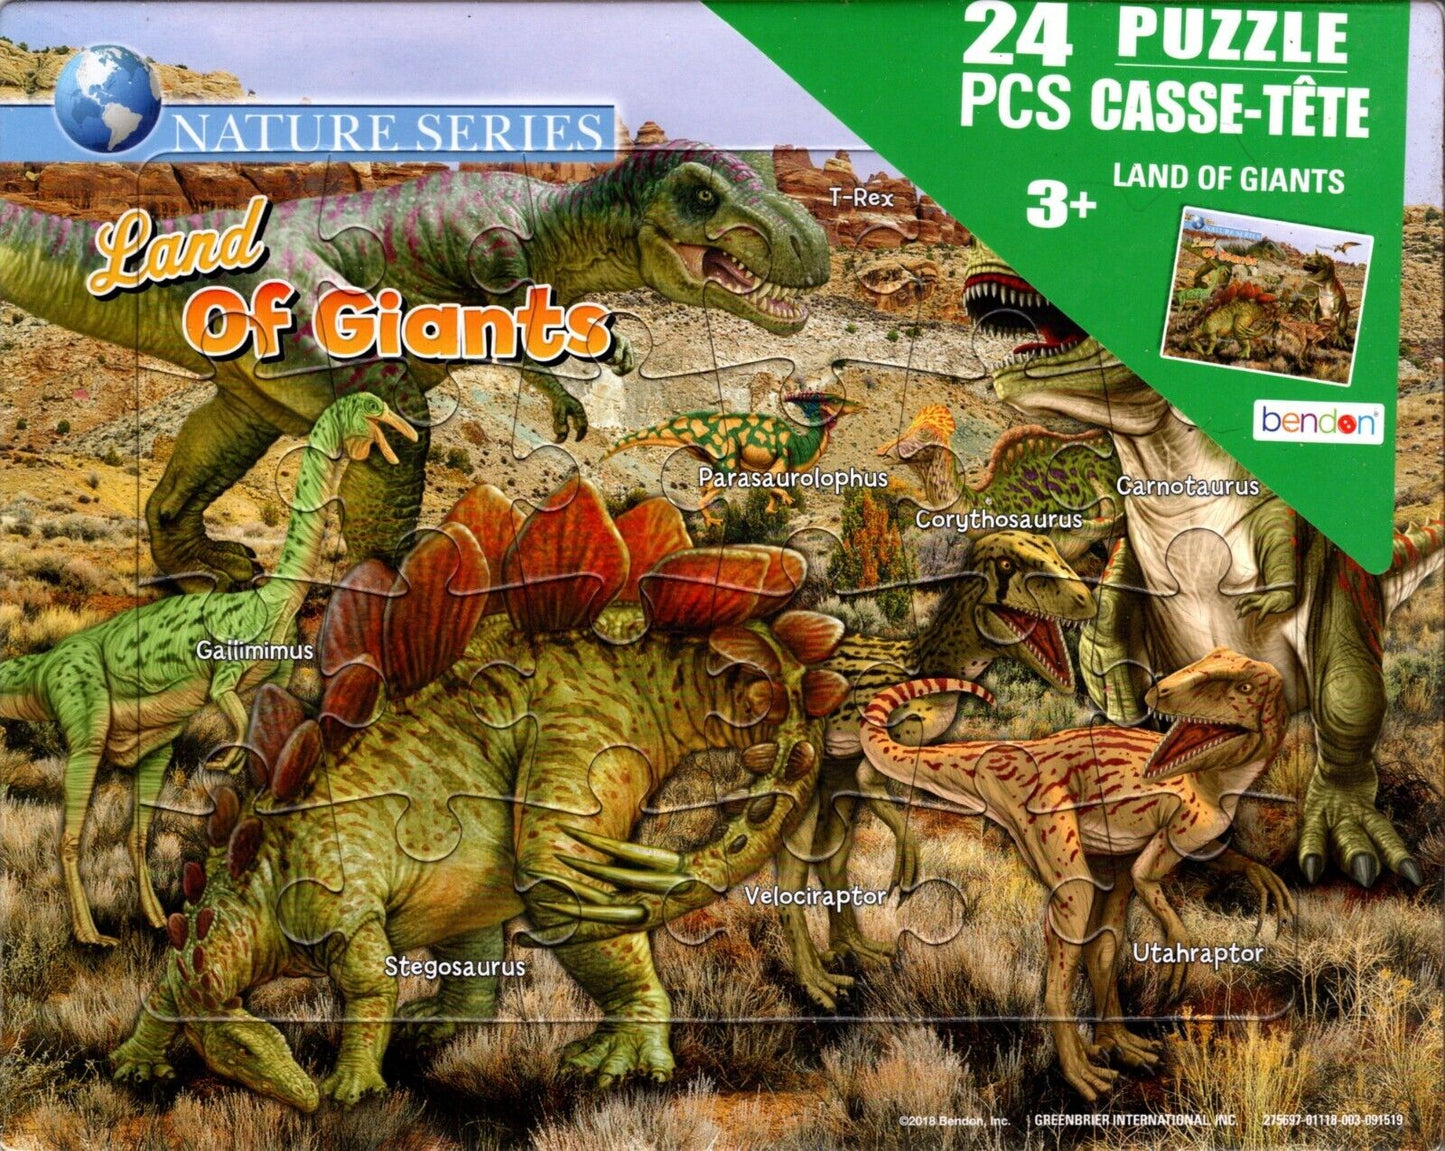 Dino Rock & Land of Giants - 24 Pieces Jigsaw Puzzle (Set of 2 Pack)